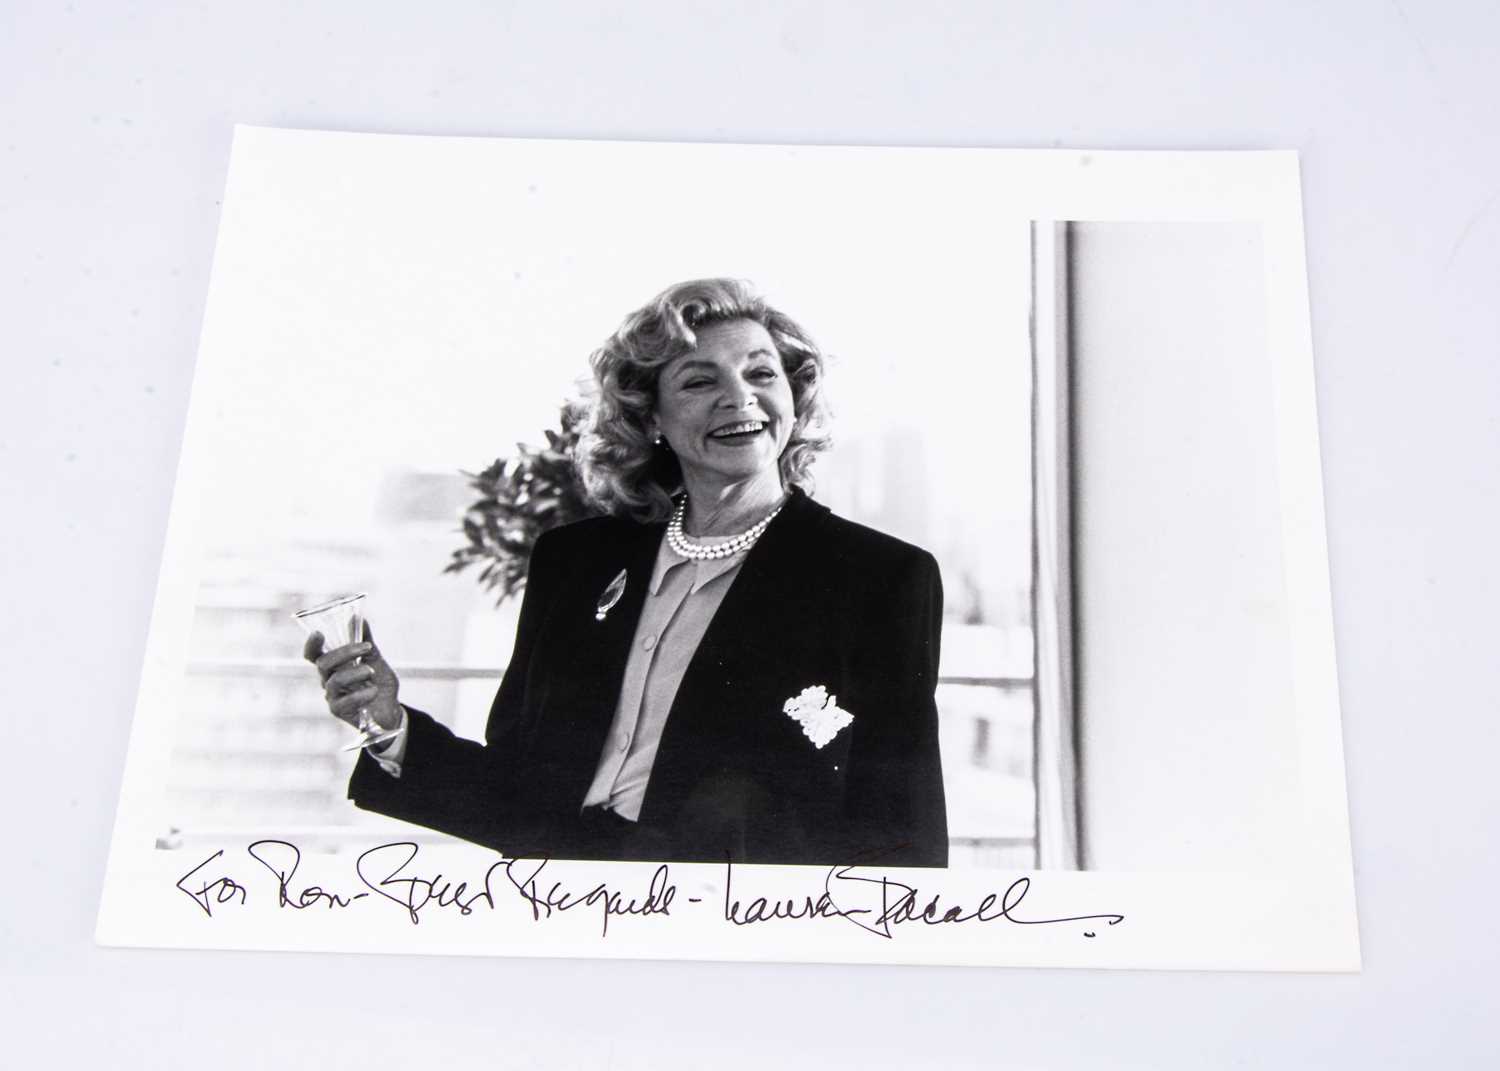 Oliver Reed / Lauren Bacall Signed Photos, - Image 4 of 5